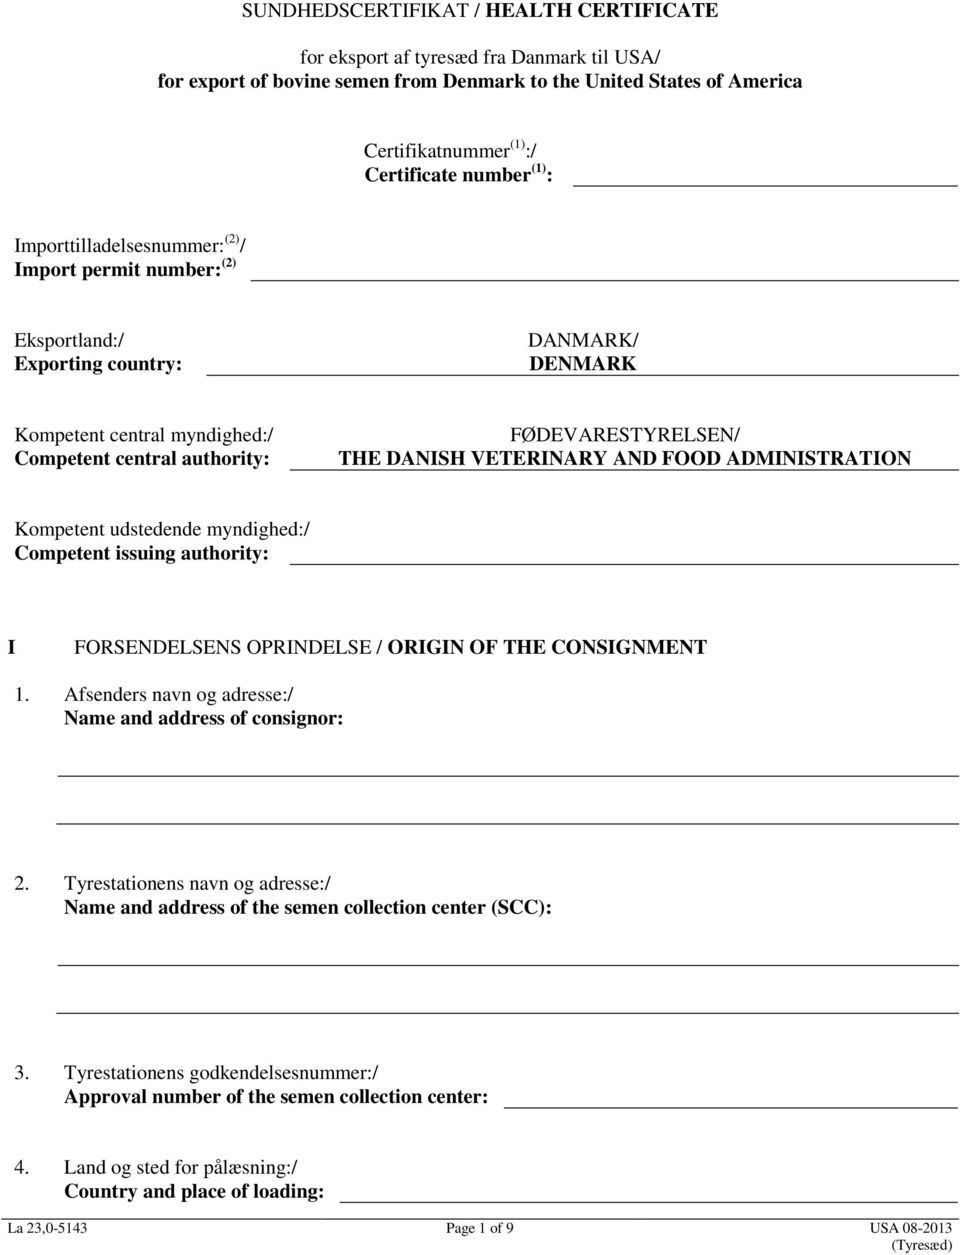 VETERINARY AND FOOD ADMINISTRATION Kompetent udstedende myndighed:/ Competent issuing authority: I FORSENDELSENS OPRINDELSE / ORIGIN OF THE CONSIGNMENT 1.